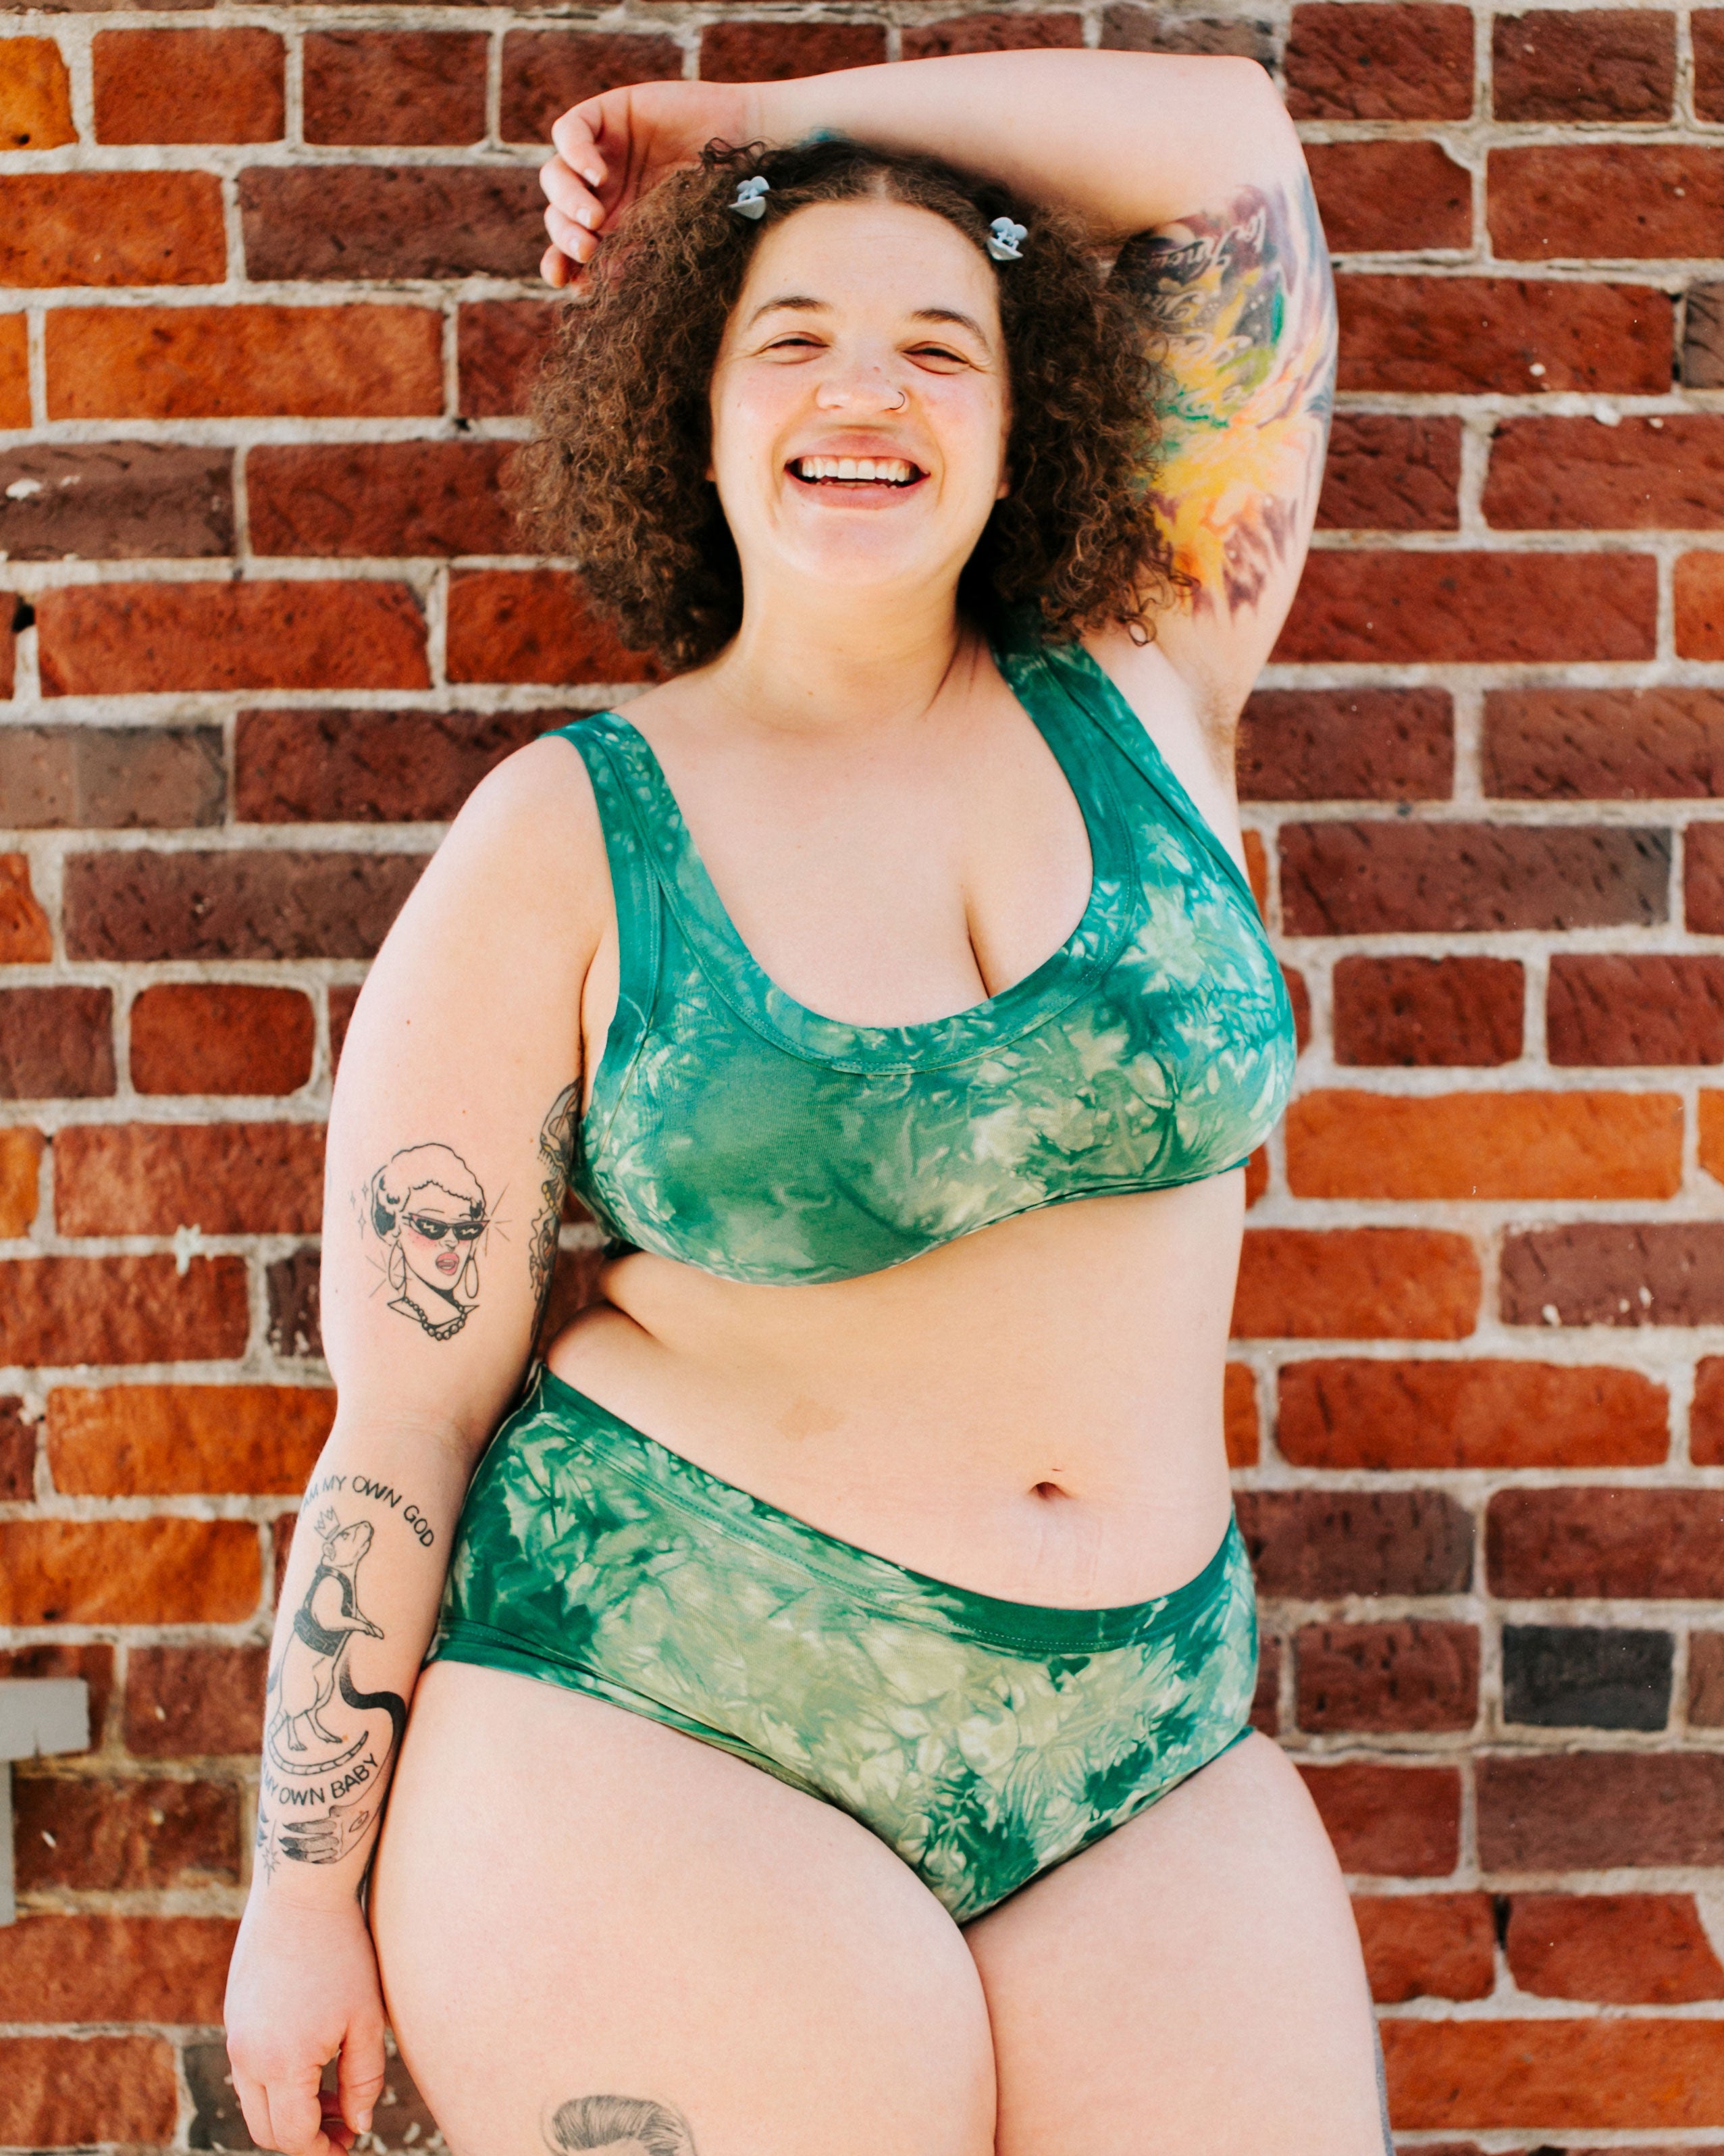 Model smiling while wearing Thunderpants organic cotton Hipster style underwear and Bralette in Clover Green scrunch dye.